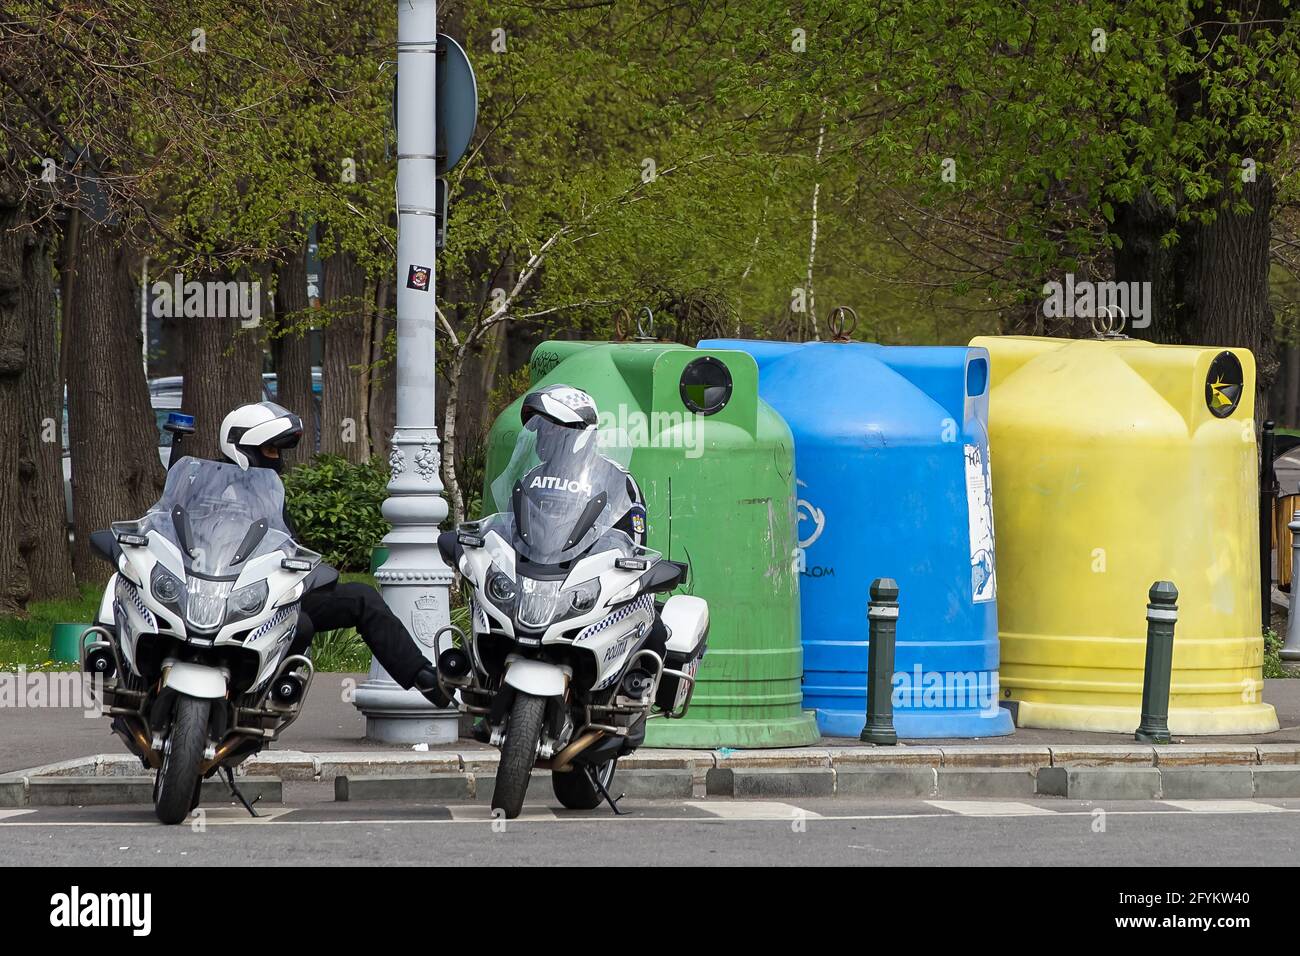 Bucharest, Romania - April 15, 2021: Two policemen sitting on BMW R 1200 RT authority motorcycles, talking to each other, in Bucharest. This image is Stock Photo